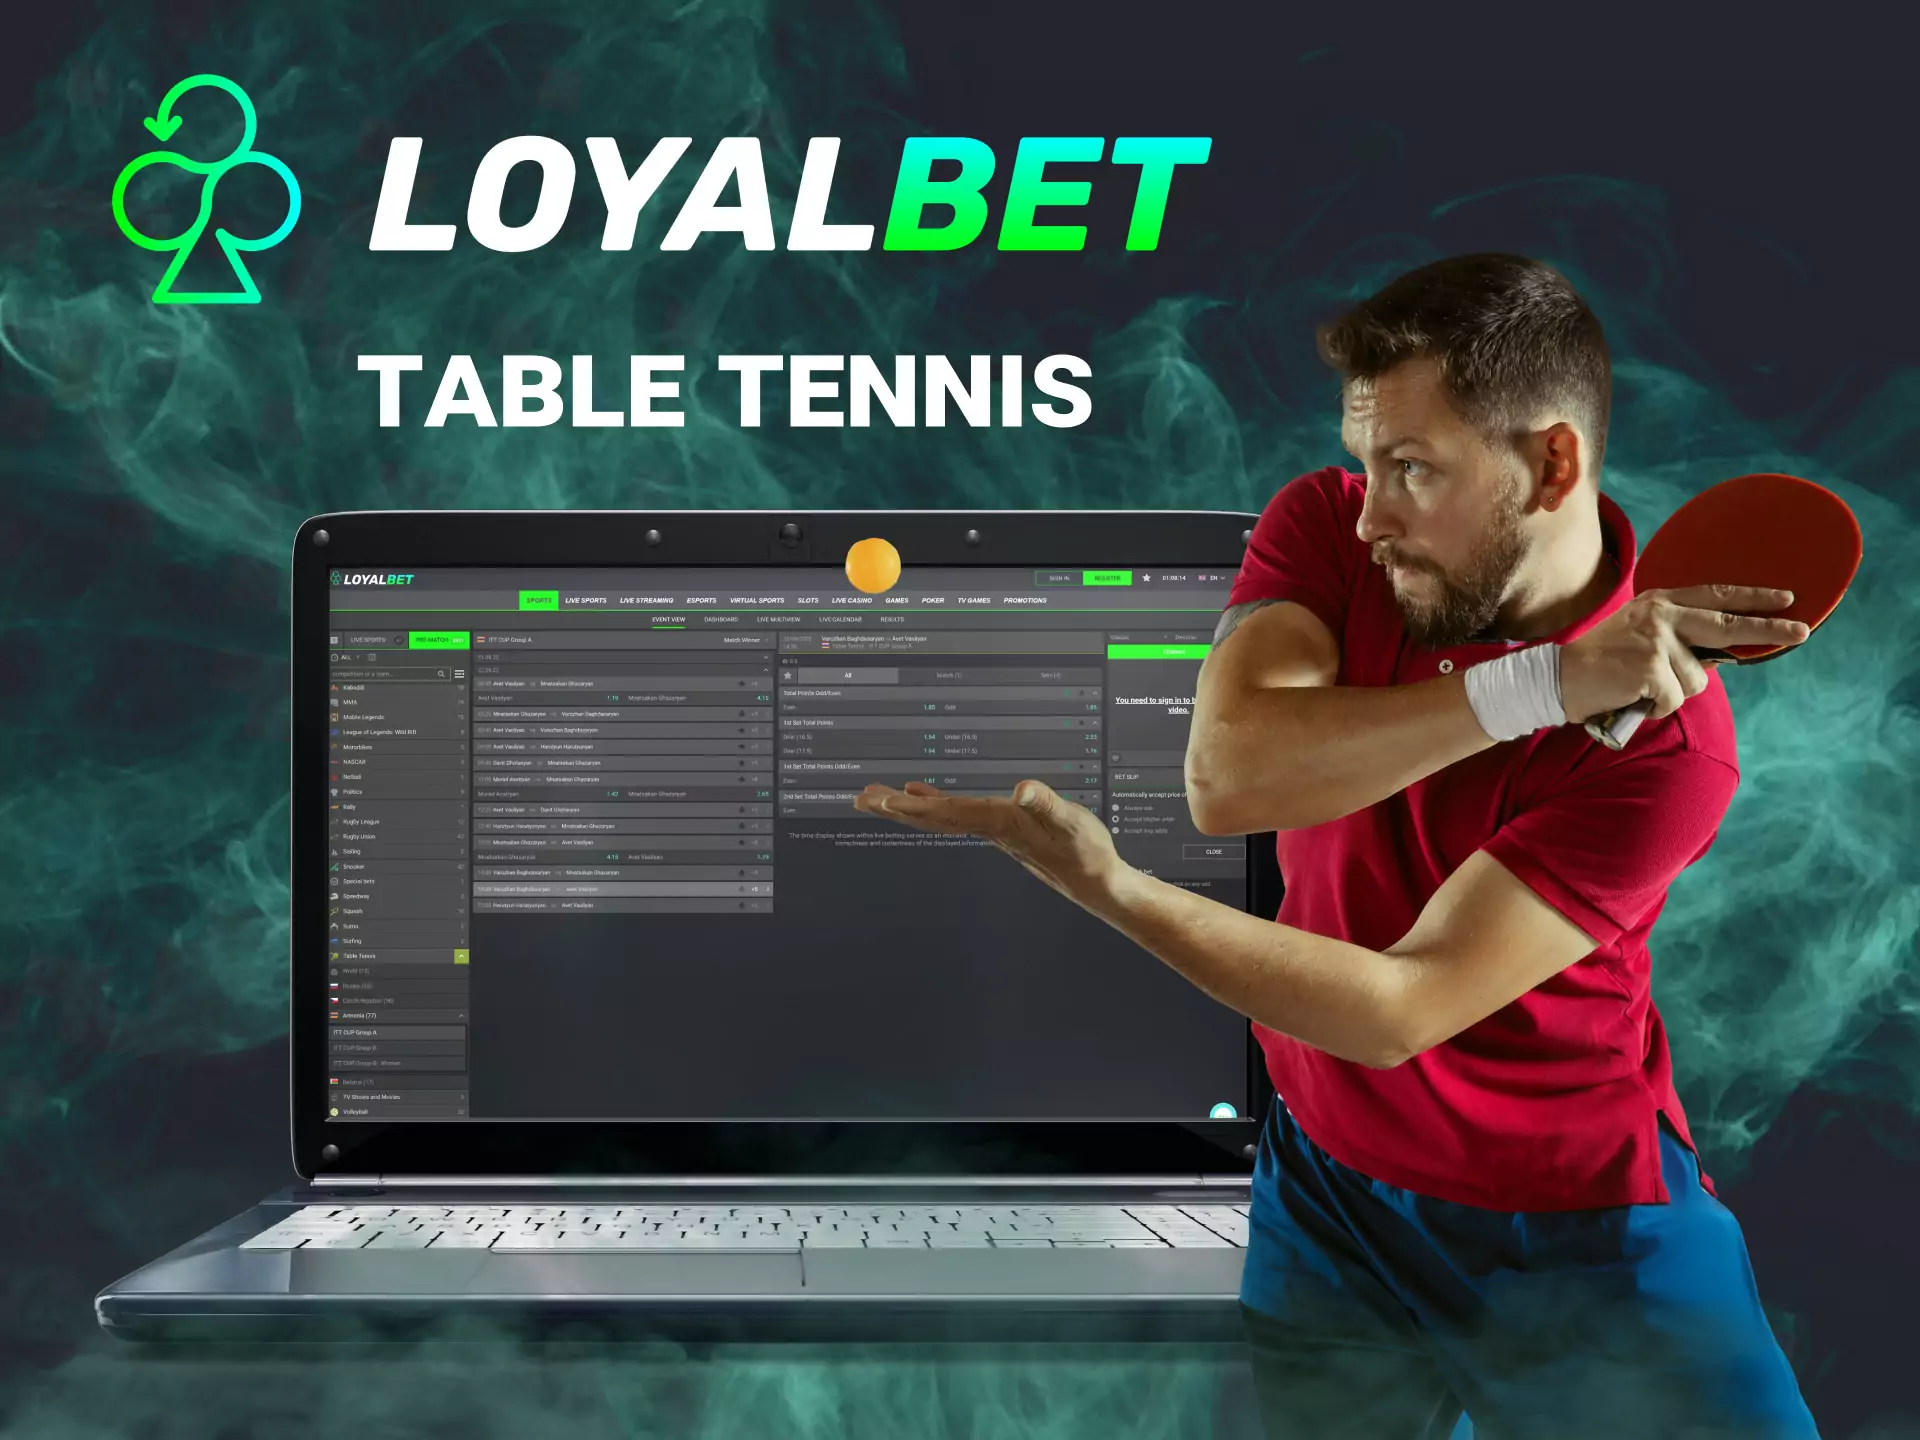 You can bet on the table tennis events on the Loyalbet website.